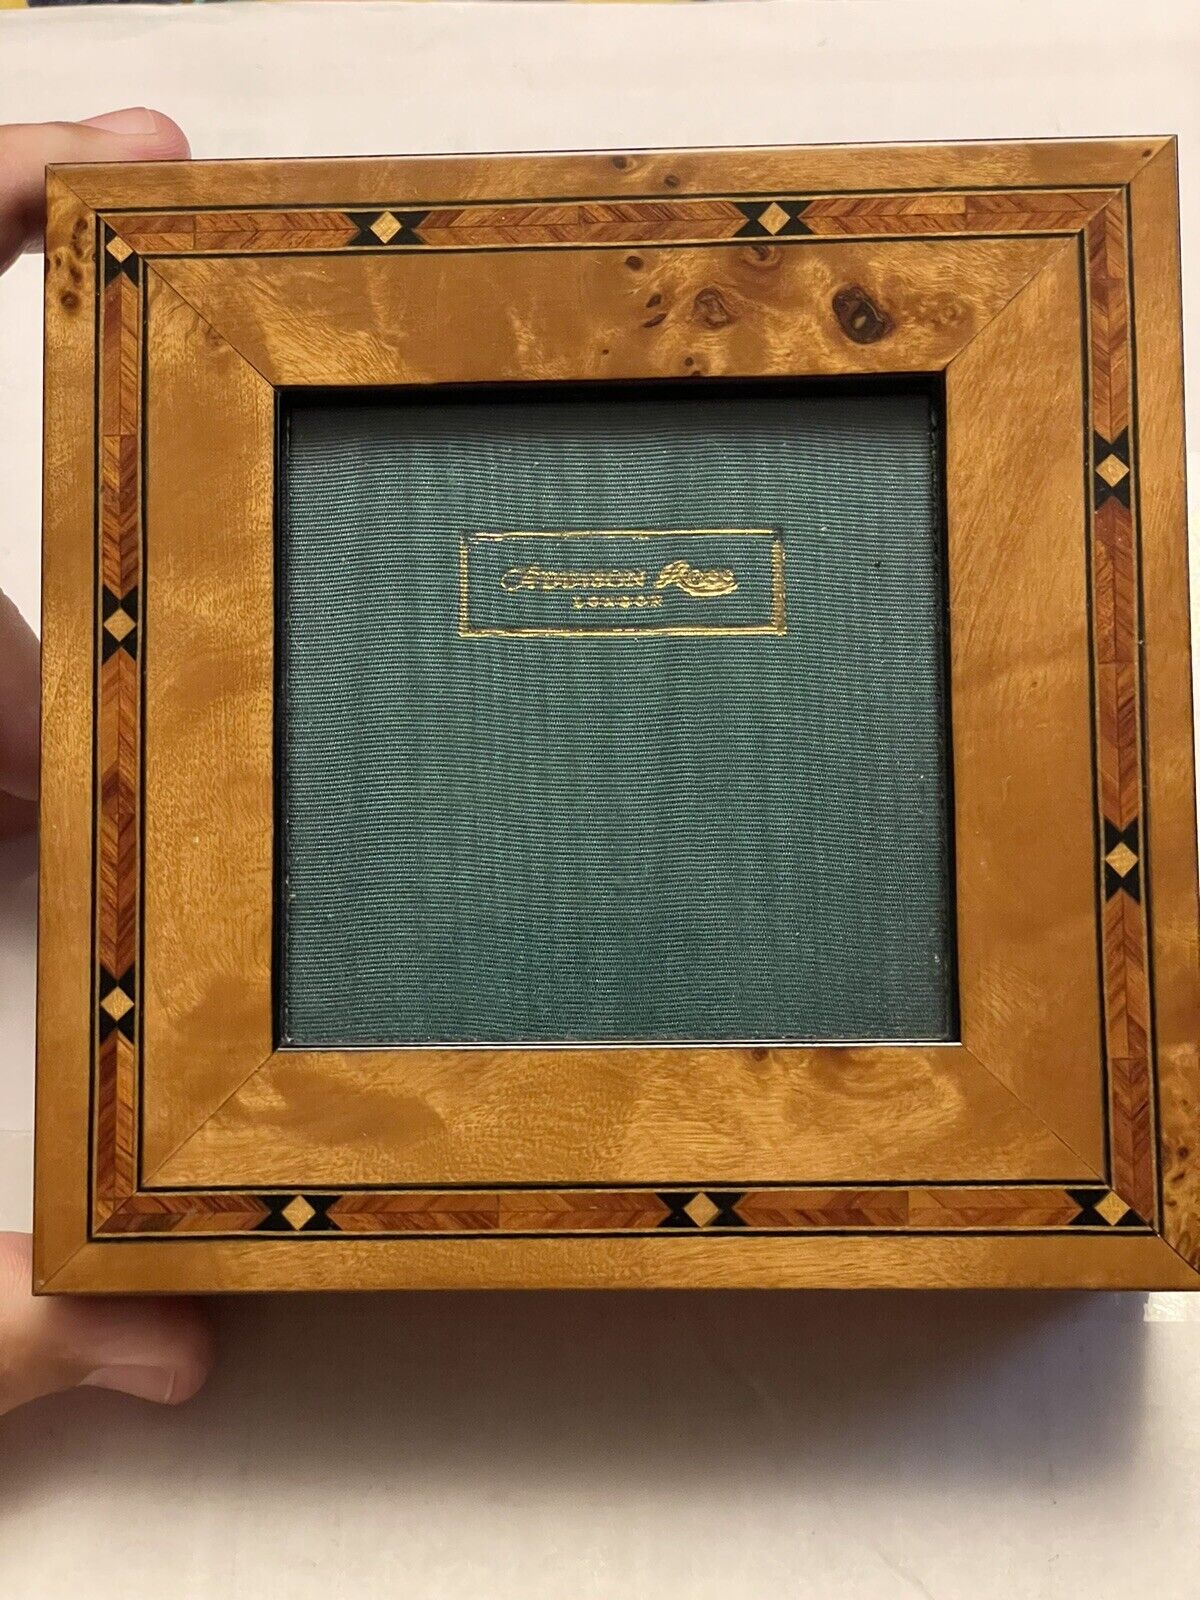 Addison Ross London Picture Frame Box England 